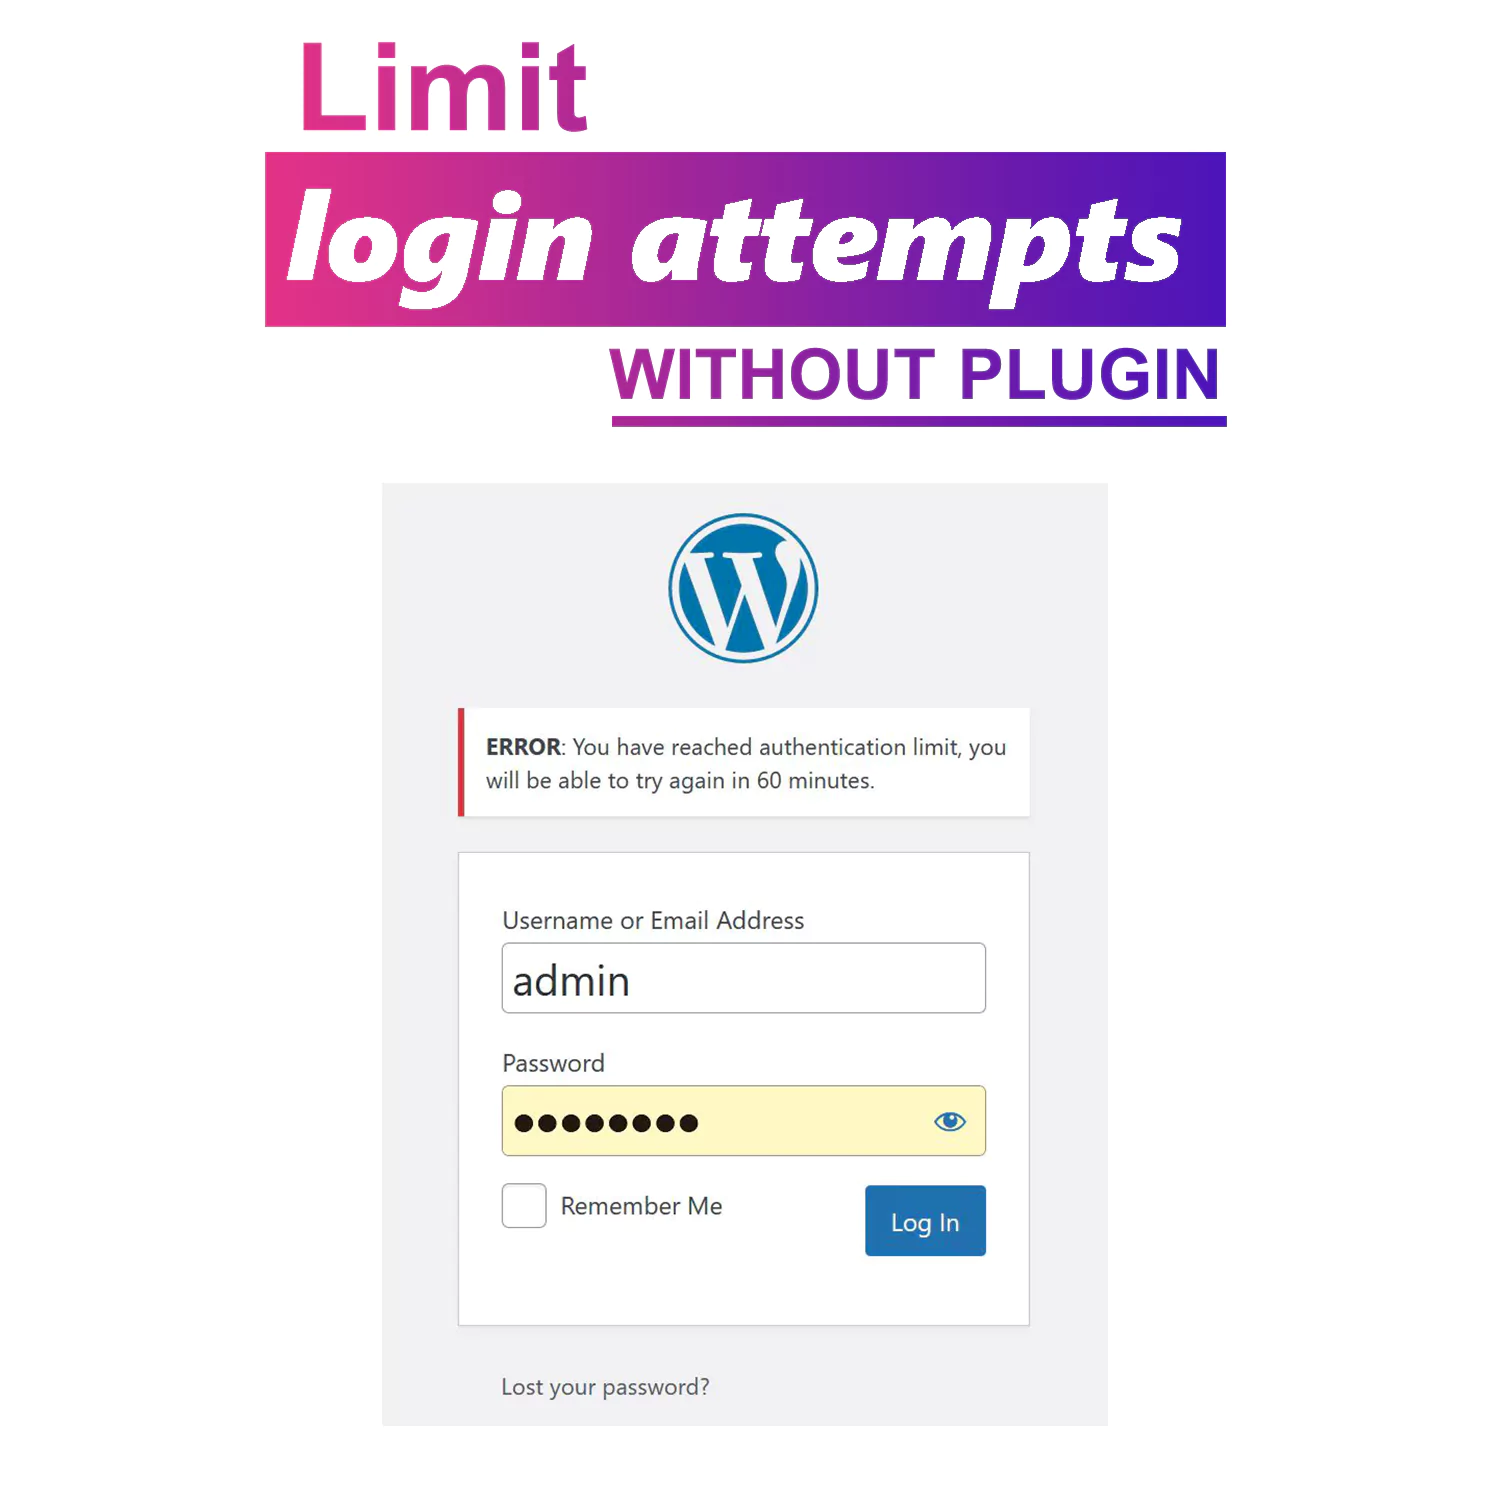 Limit login attempts in WordPress without plugin